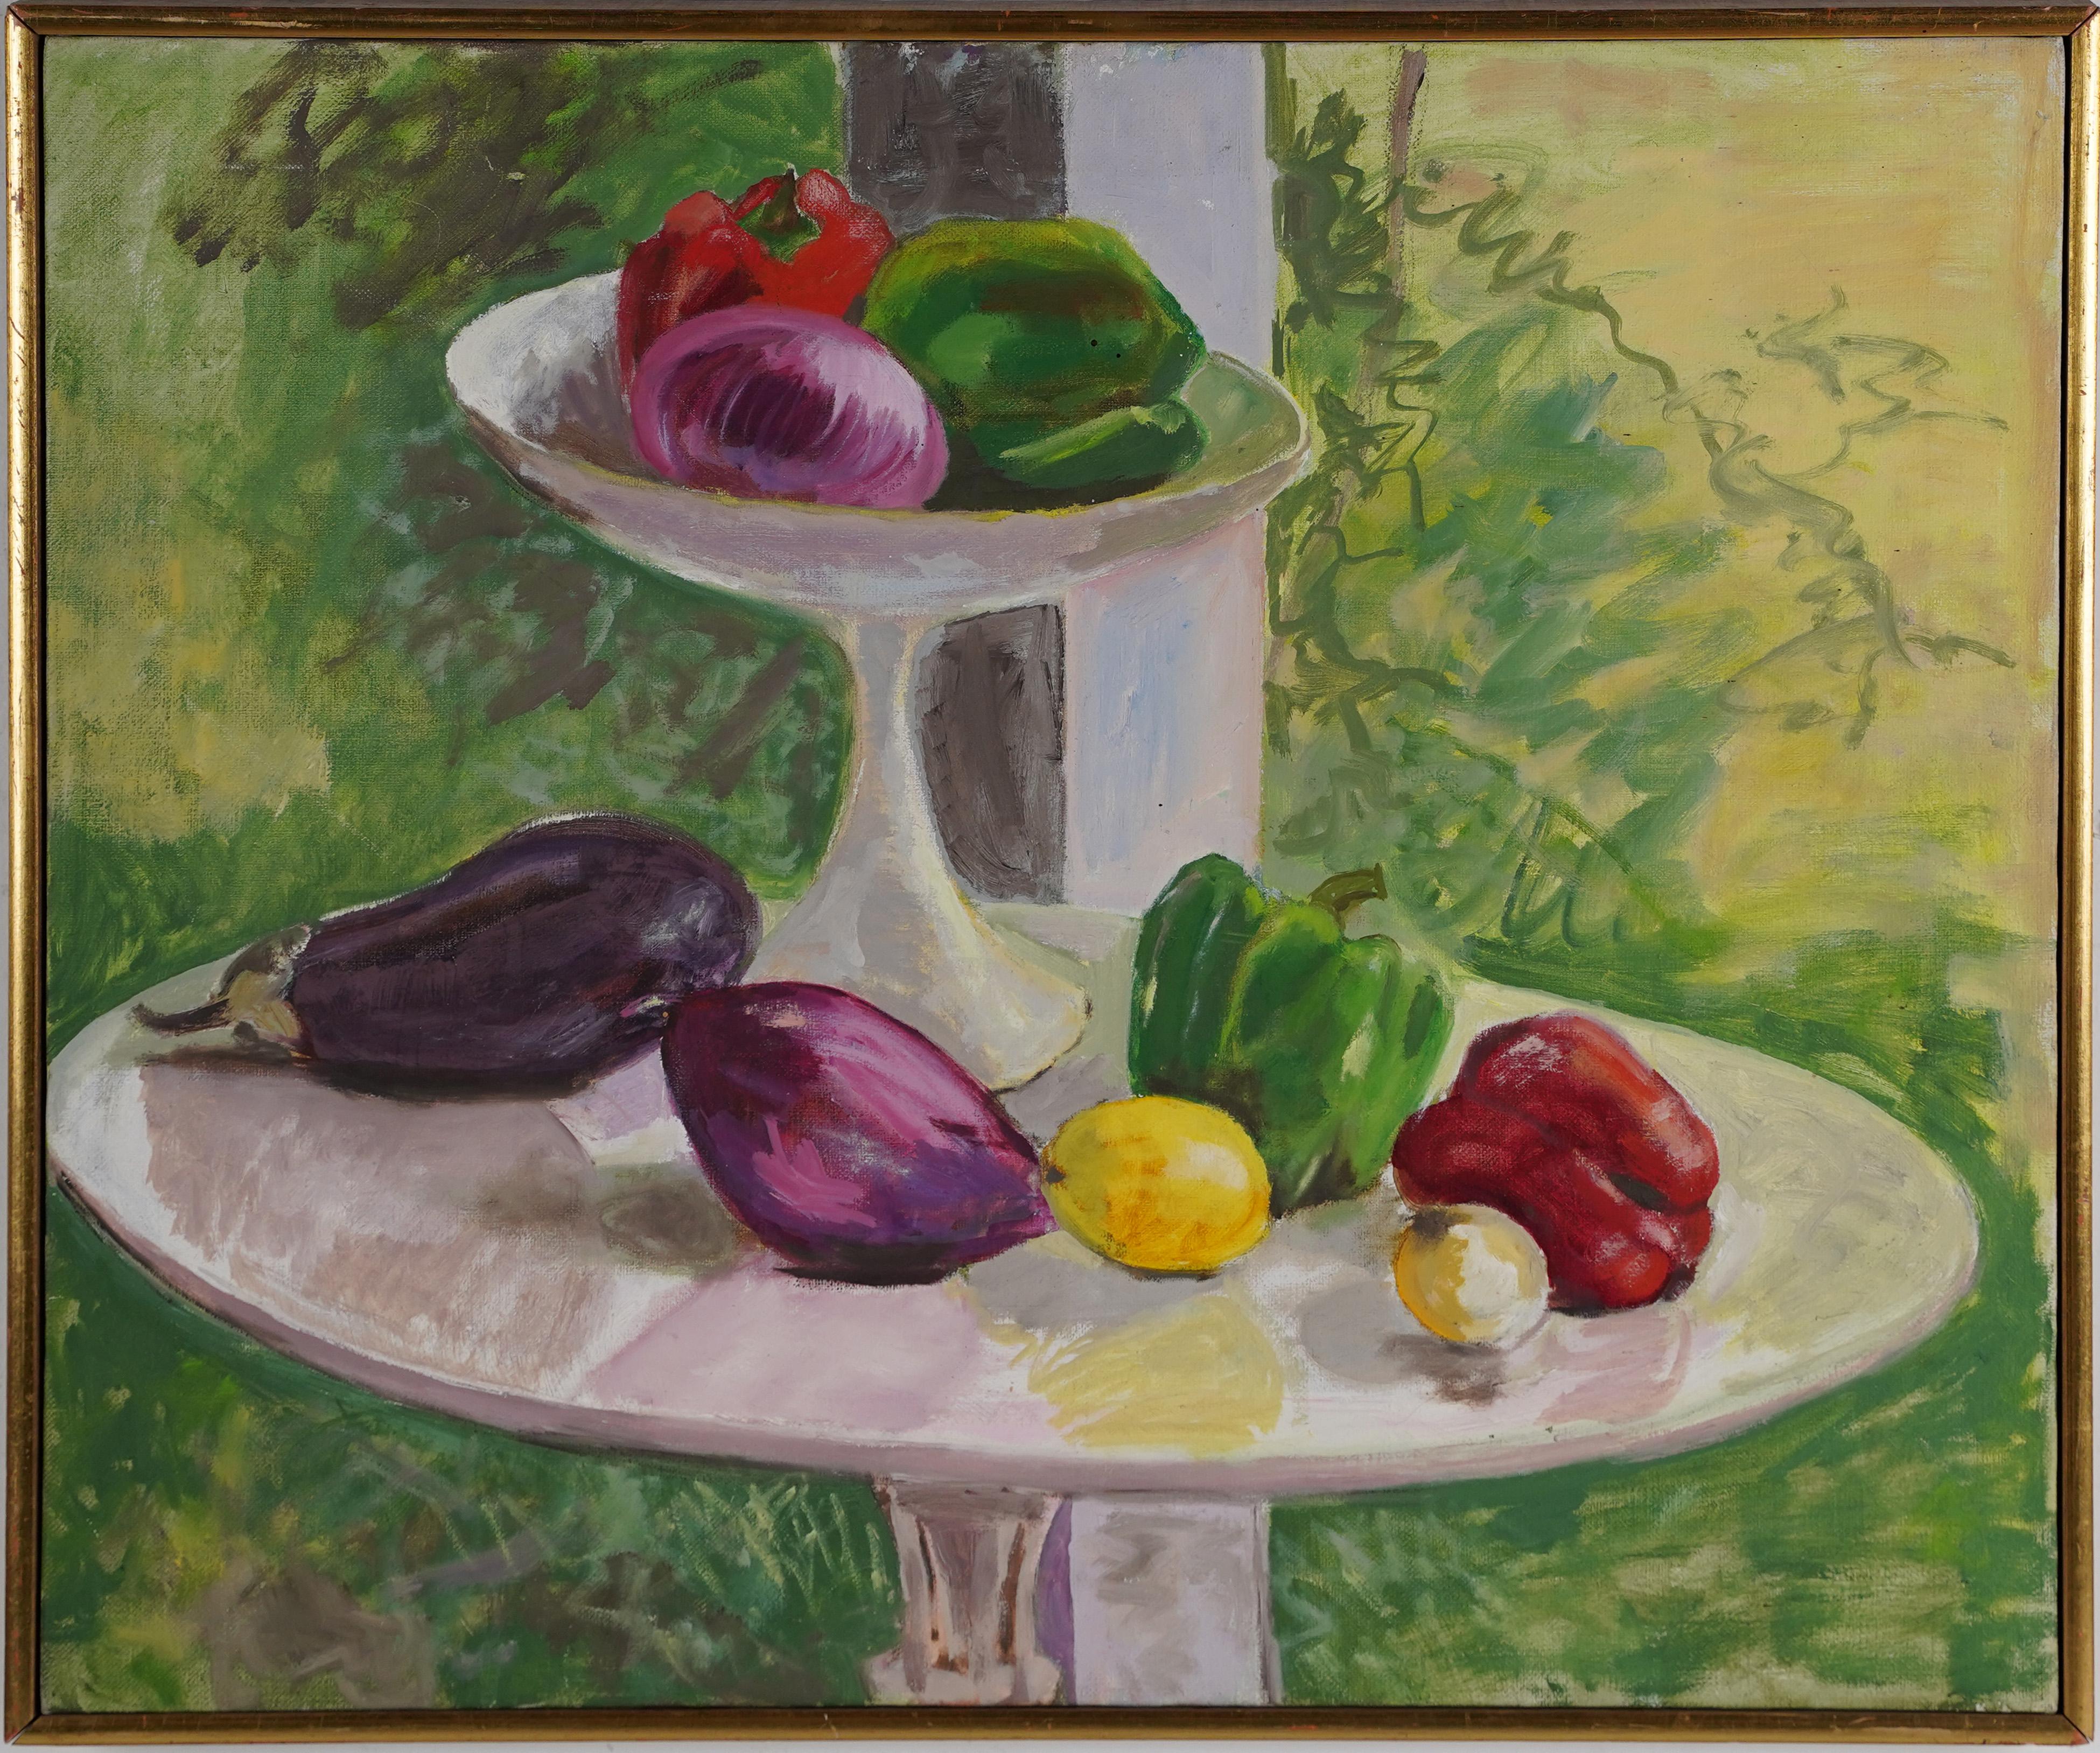 Unknown Abstract Painting - Antique American School Modernist Vegetable Garden Still Life Oil Painting